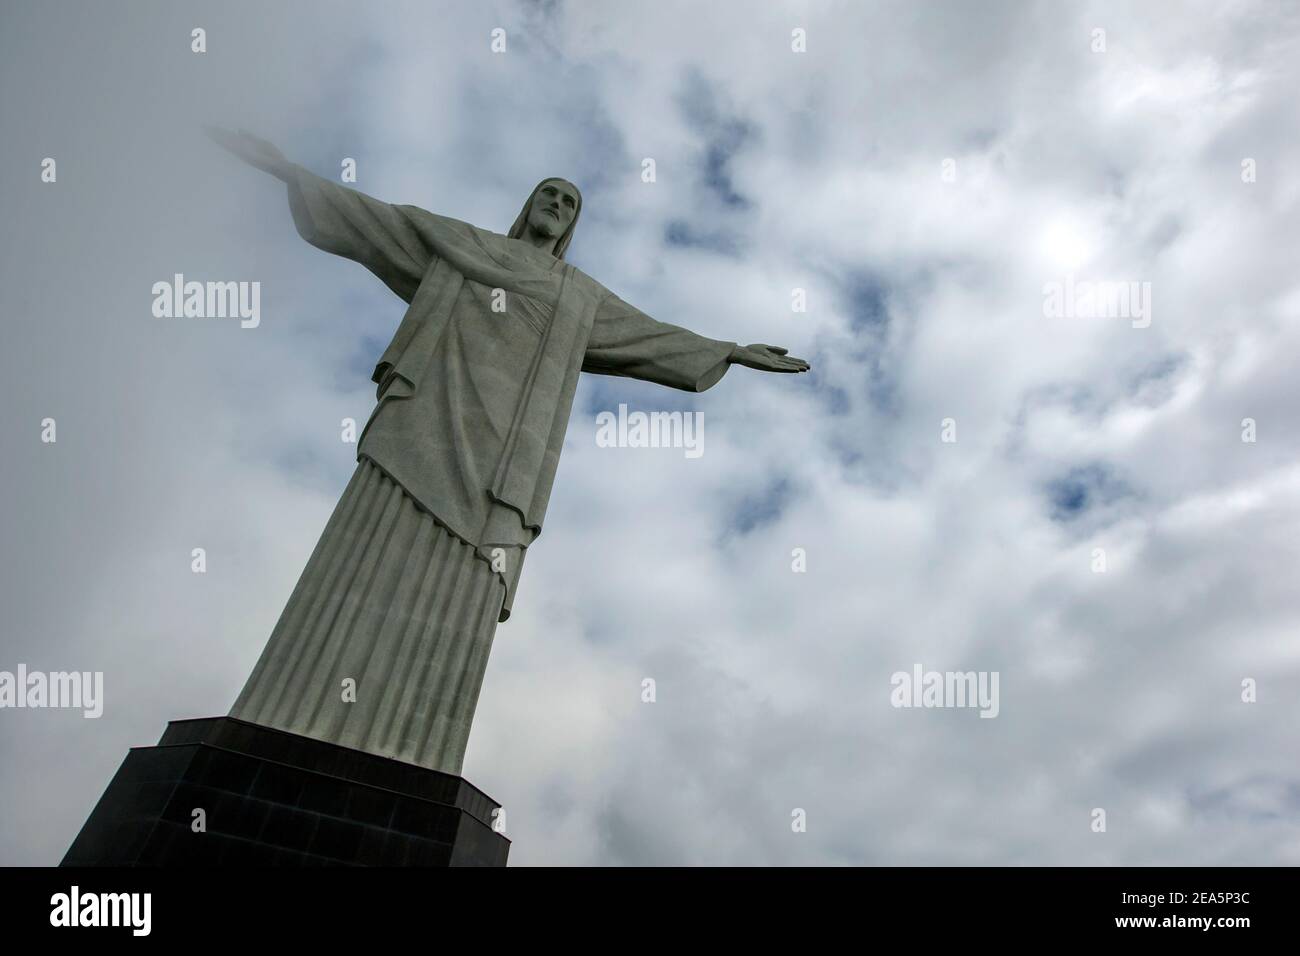 The statue of Christ the Redeemer at Rio de Janeiro in Brazil. The statue which is 30 metres high, sits atop Corcovado Mountain. Stock Photo